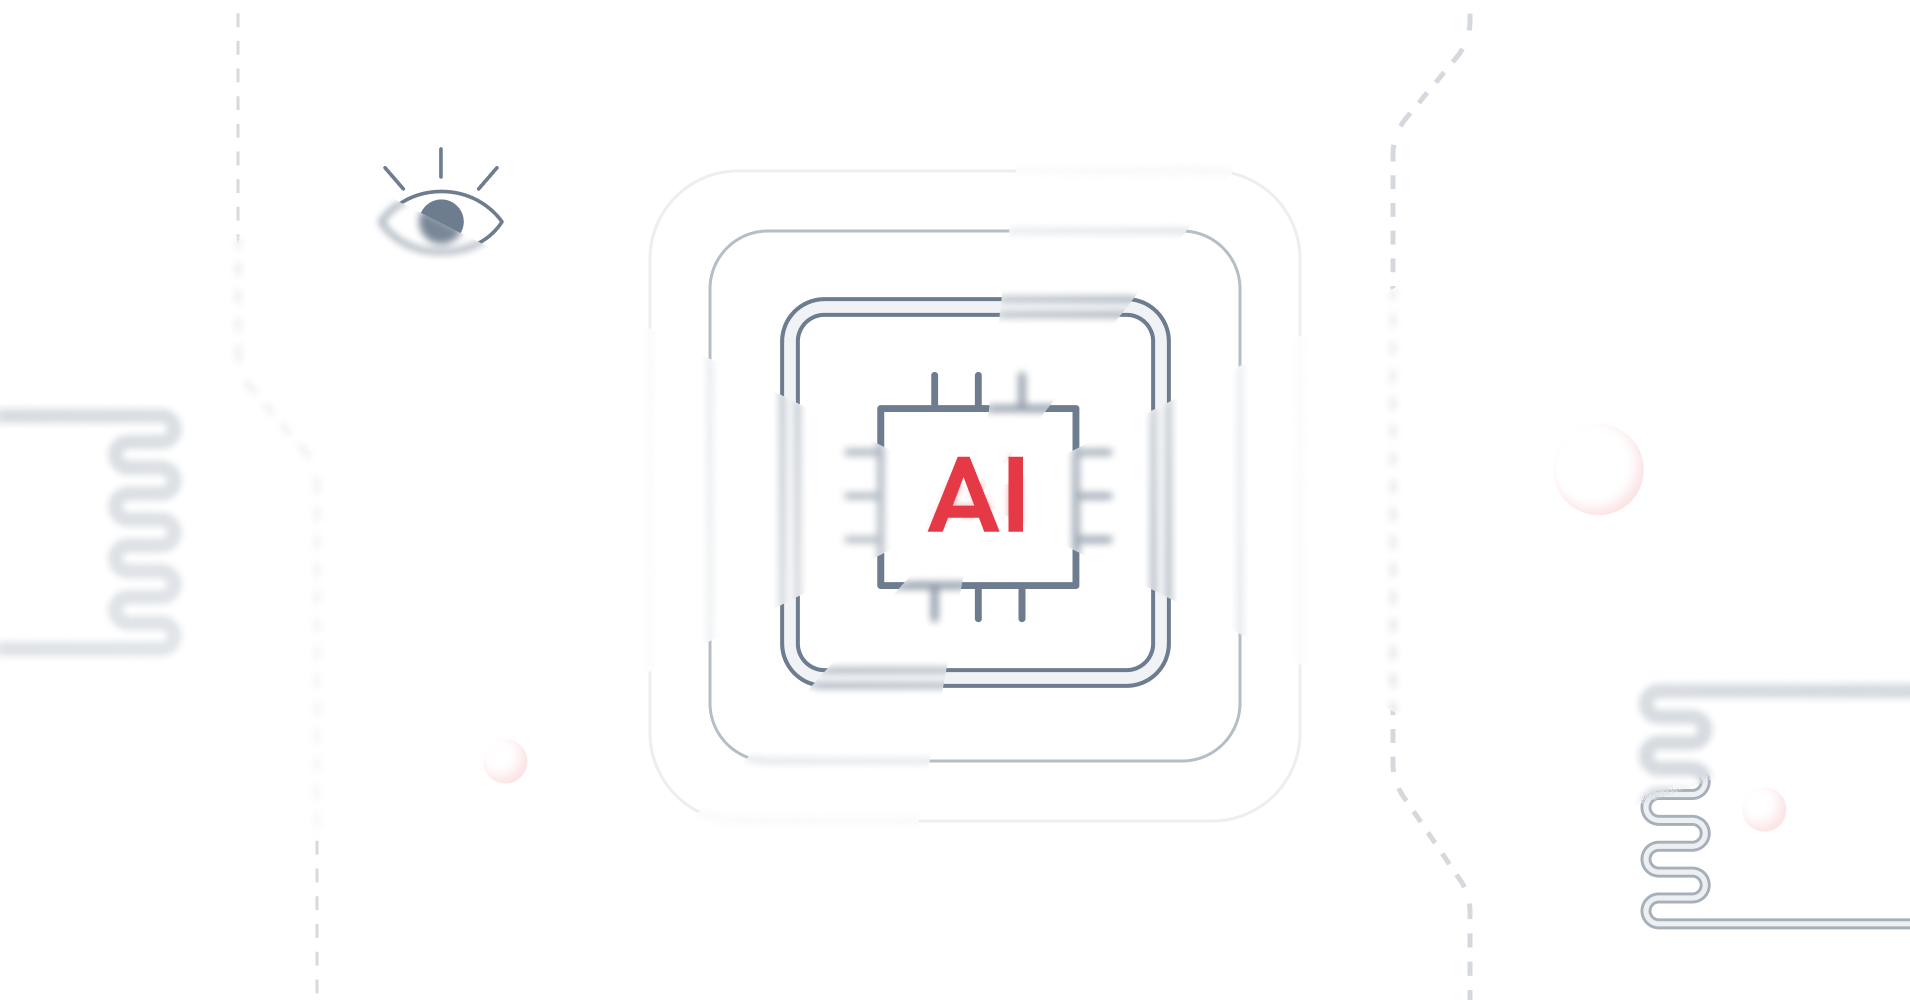 Illustration highlighting the integration of ESG principles and AI technology, showcasing an AI chip and related elements